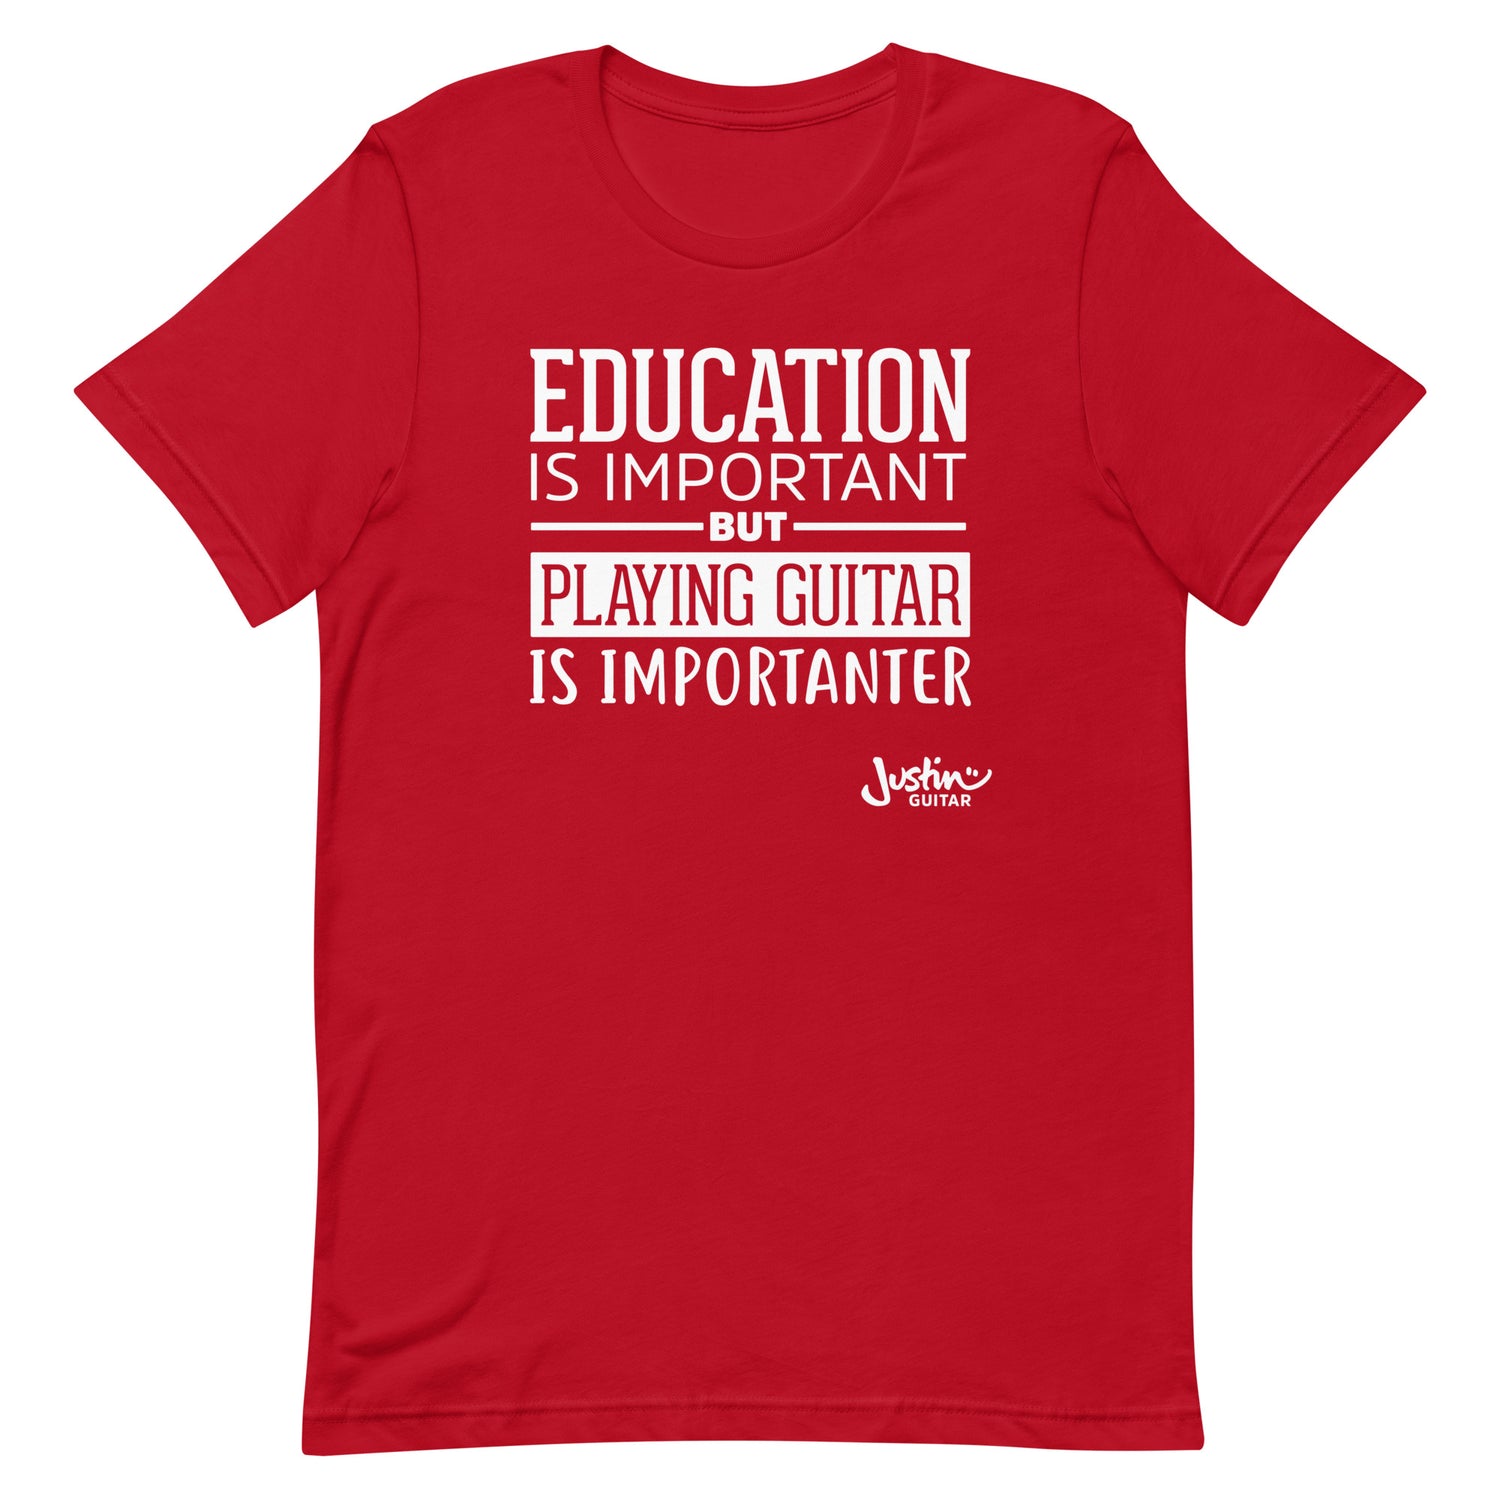 Red tshirt that says 'Education is important, but playing guitar is importanter'